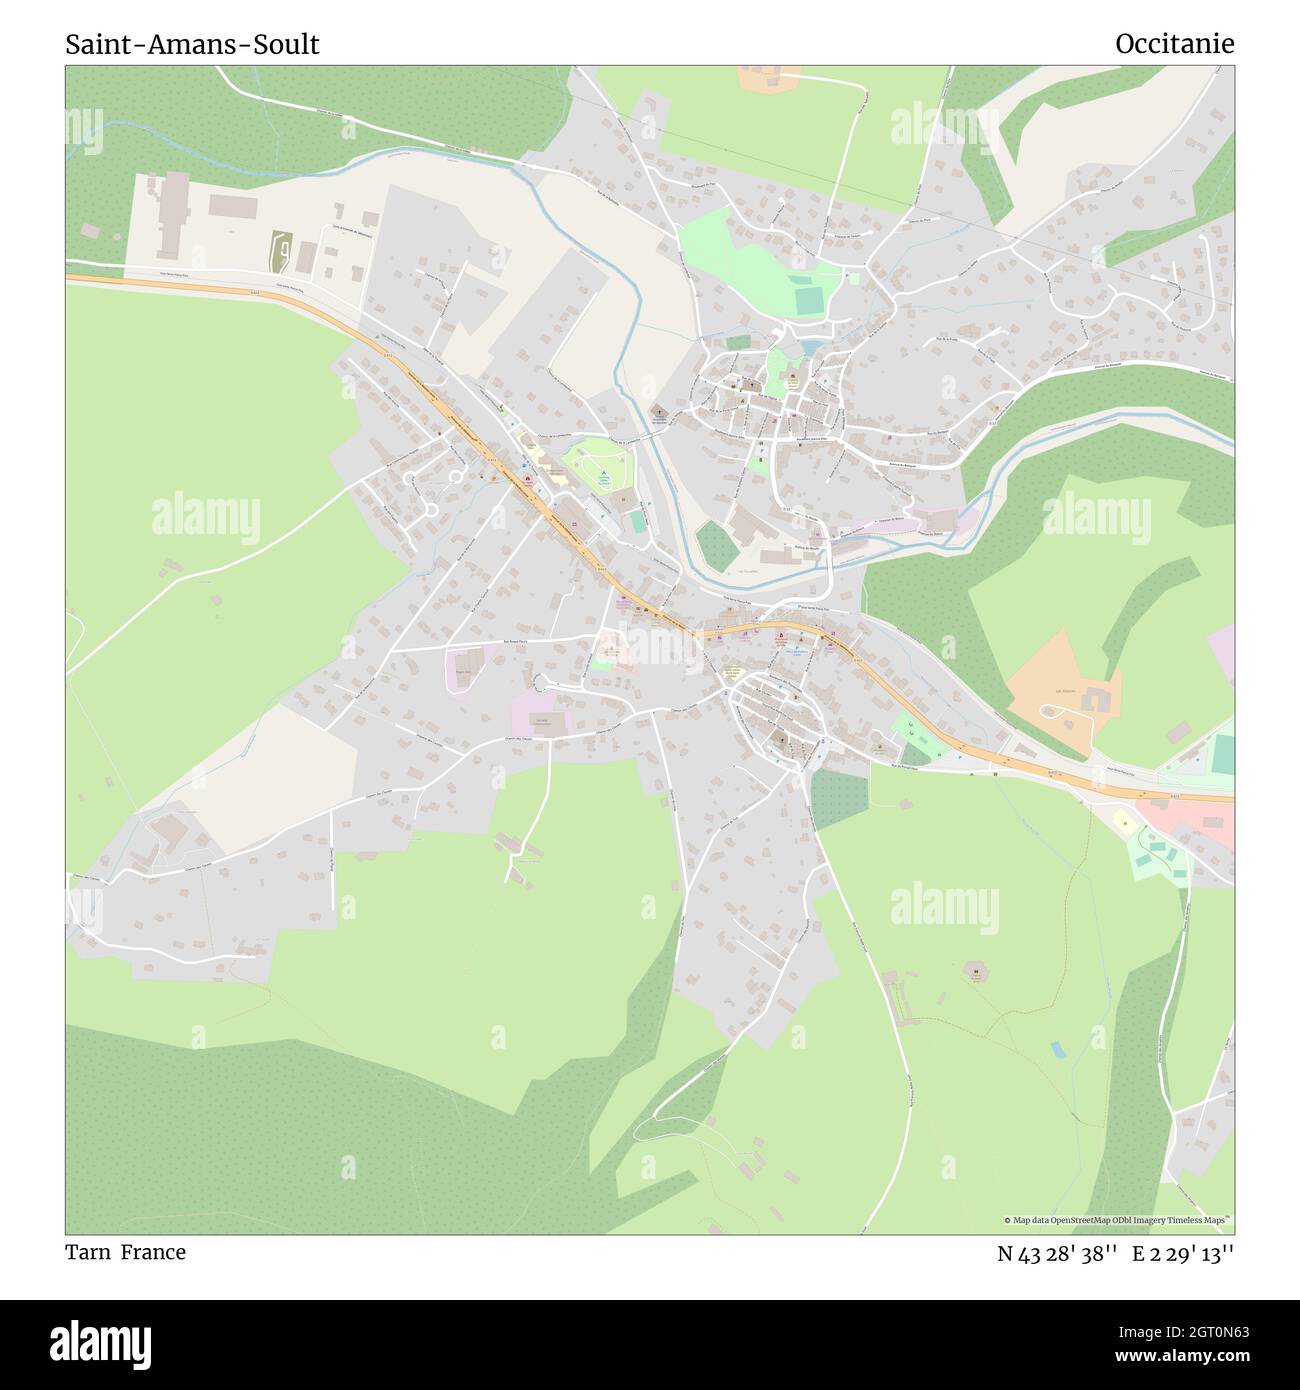 Saint-Amans-Soult, Tarn, France, Occitanie, N 43 28' 38'', E 2 29' 13'', map, Timeless Map published in 2021. Travelers, explorers and adventurers like Florence Nightingale, David Livingstone, Ernest Shackleton, Lewis and Clark and Sherlock Holmes relied on maps to plan travels to the world's most remote corners, Timeless Maps is mapping most locations on the globe, showing the achievement of great dreams Stock Photo